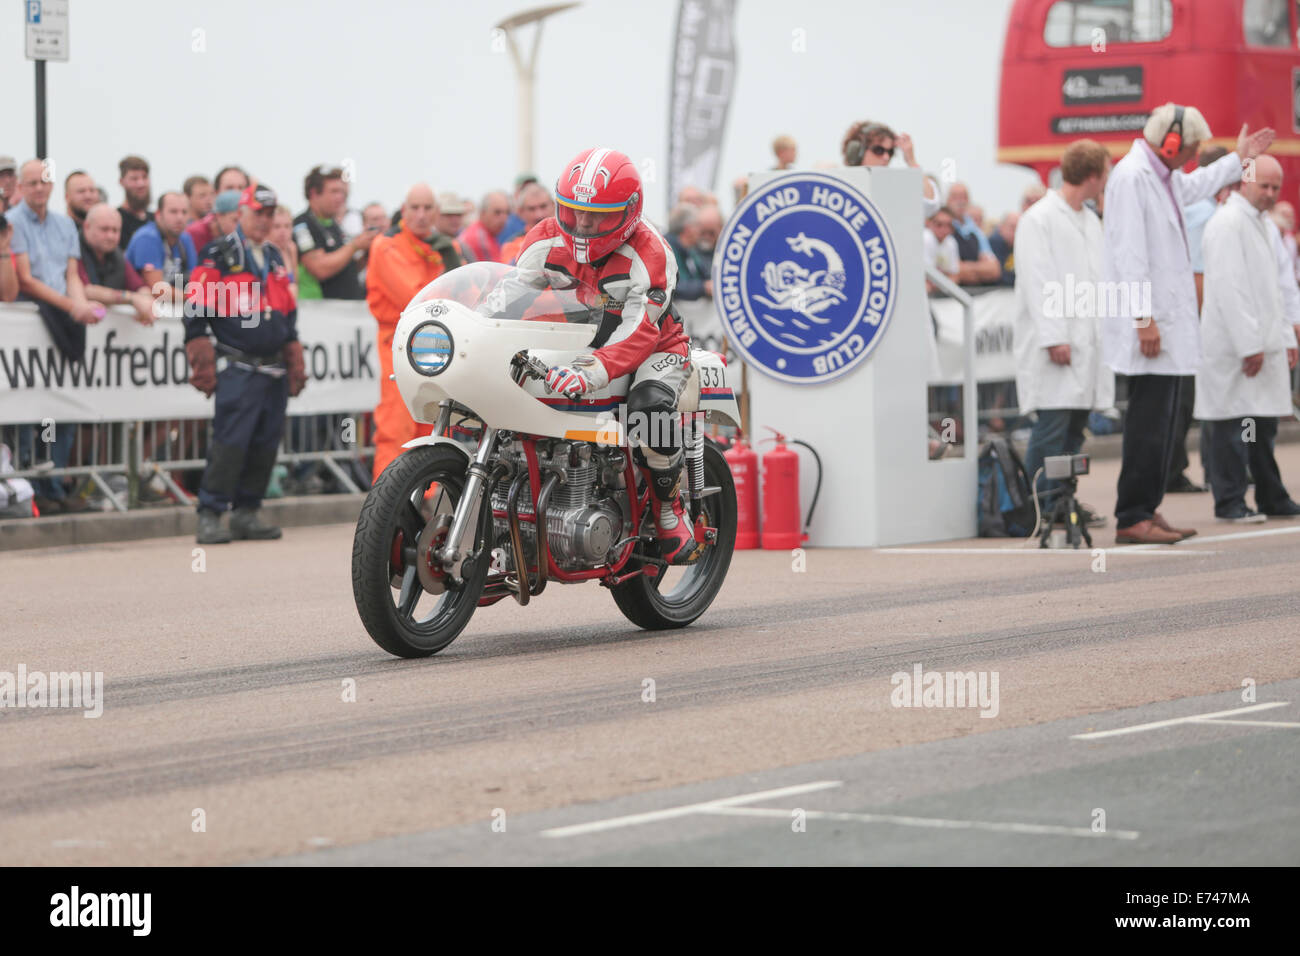 This is Mike Gilbert riding a Dresda Honda 500/4 at the Brighton National Speed Trials organised by the Brighton & Hove Motor Club held annually at Madeira Drive, Brighton Seafront, Brighton, East Sussex, UK. 6th September 2014 Stock Photo